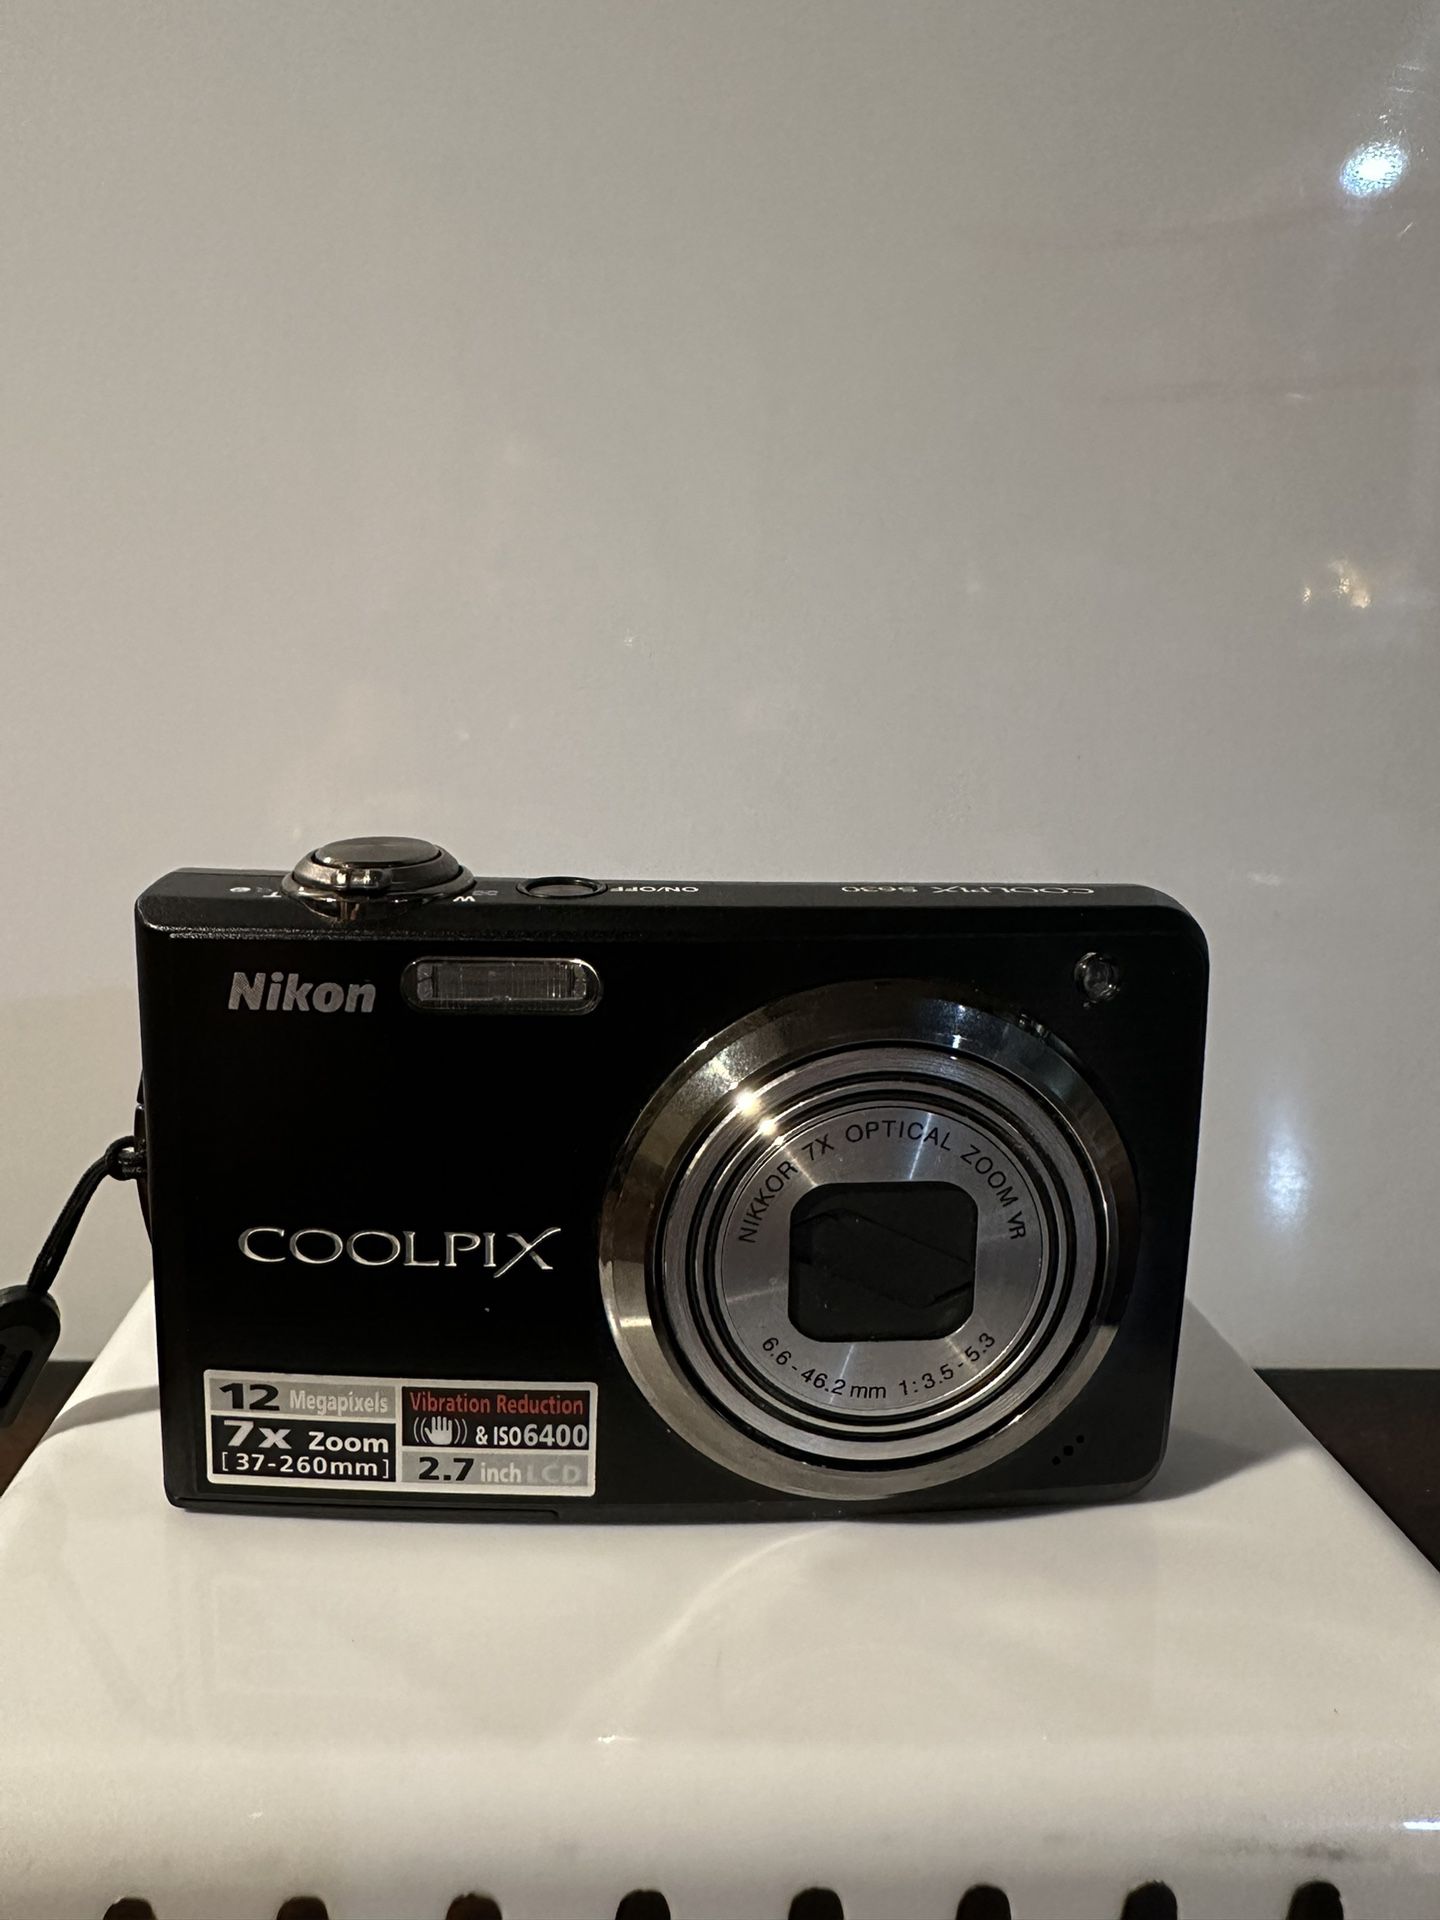 Nikon Coolpix S630 12MP Digital Camera with 7x Optical Vibration Reduction (VR) Zoom and 2.7 inch LCD (Jet Black)i